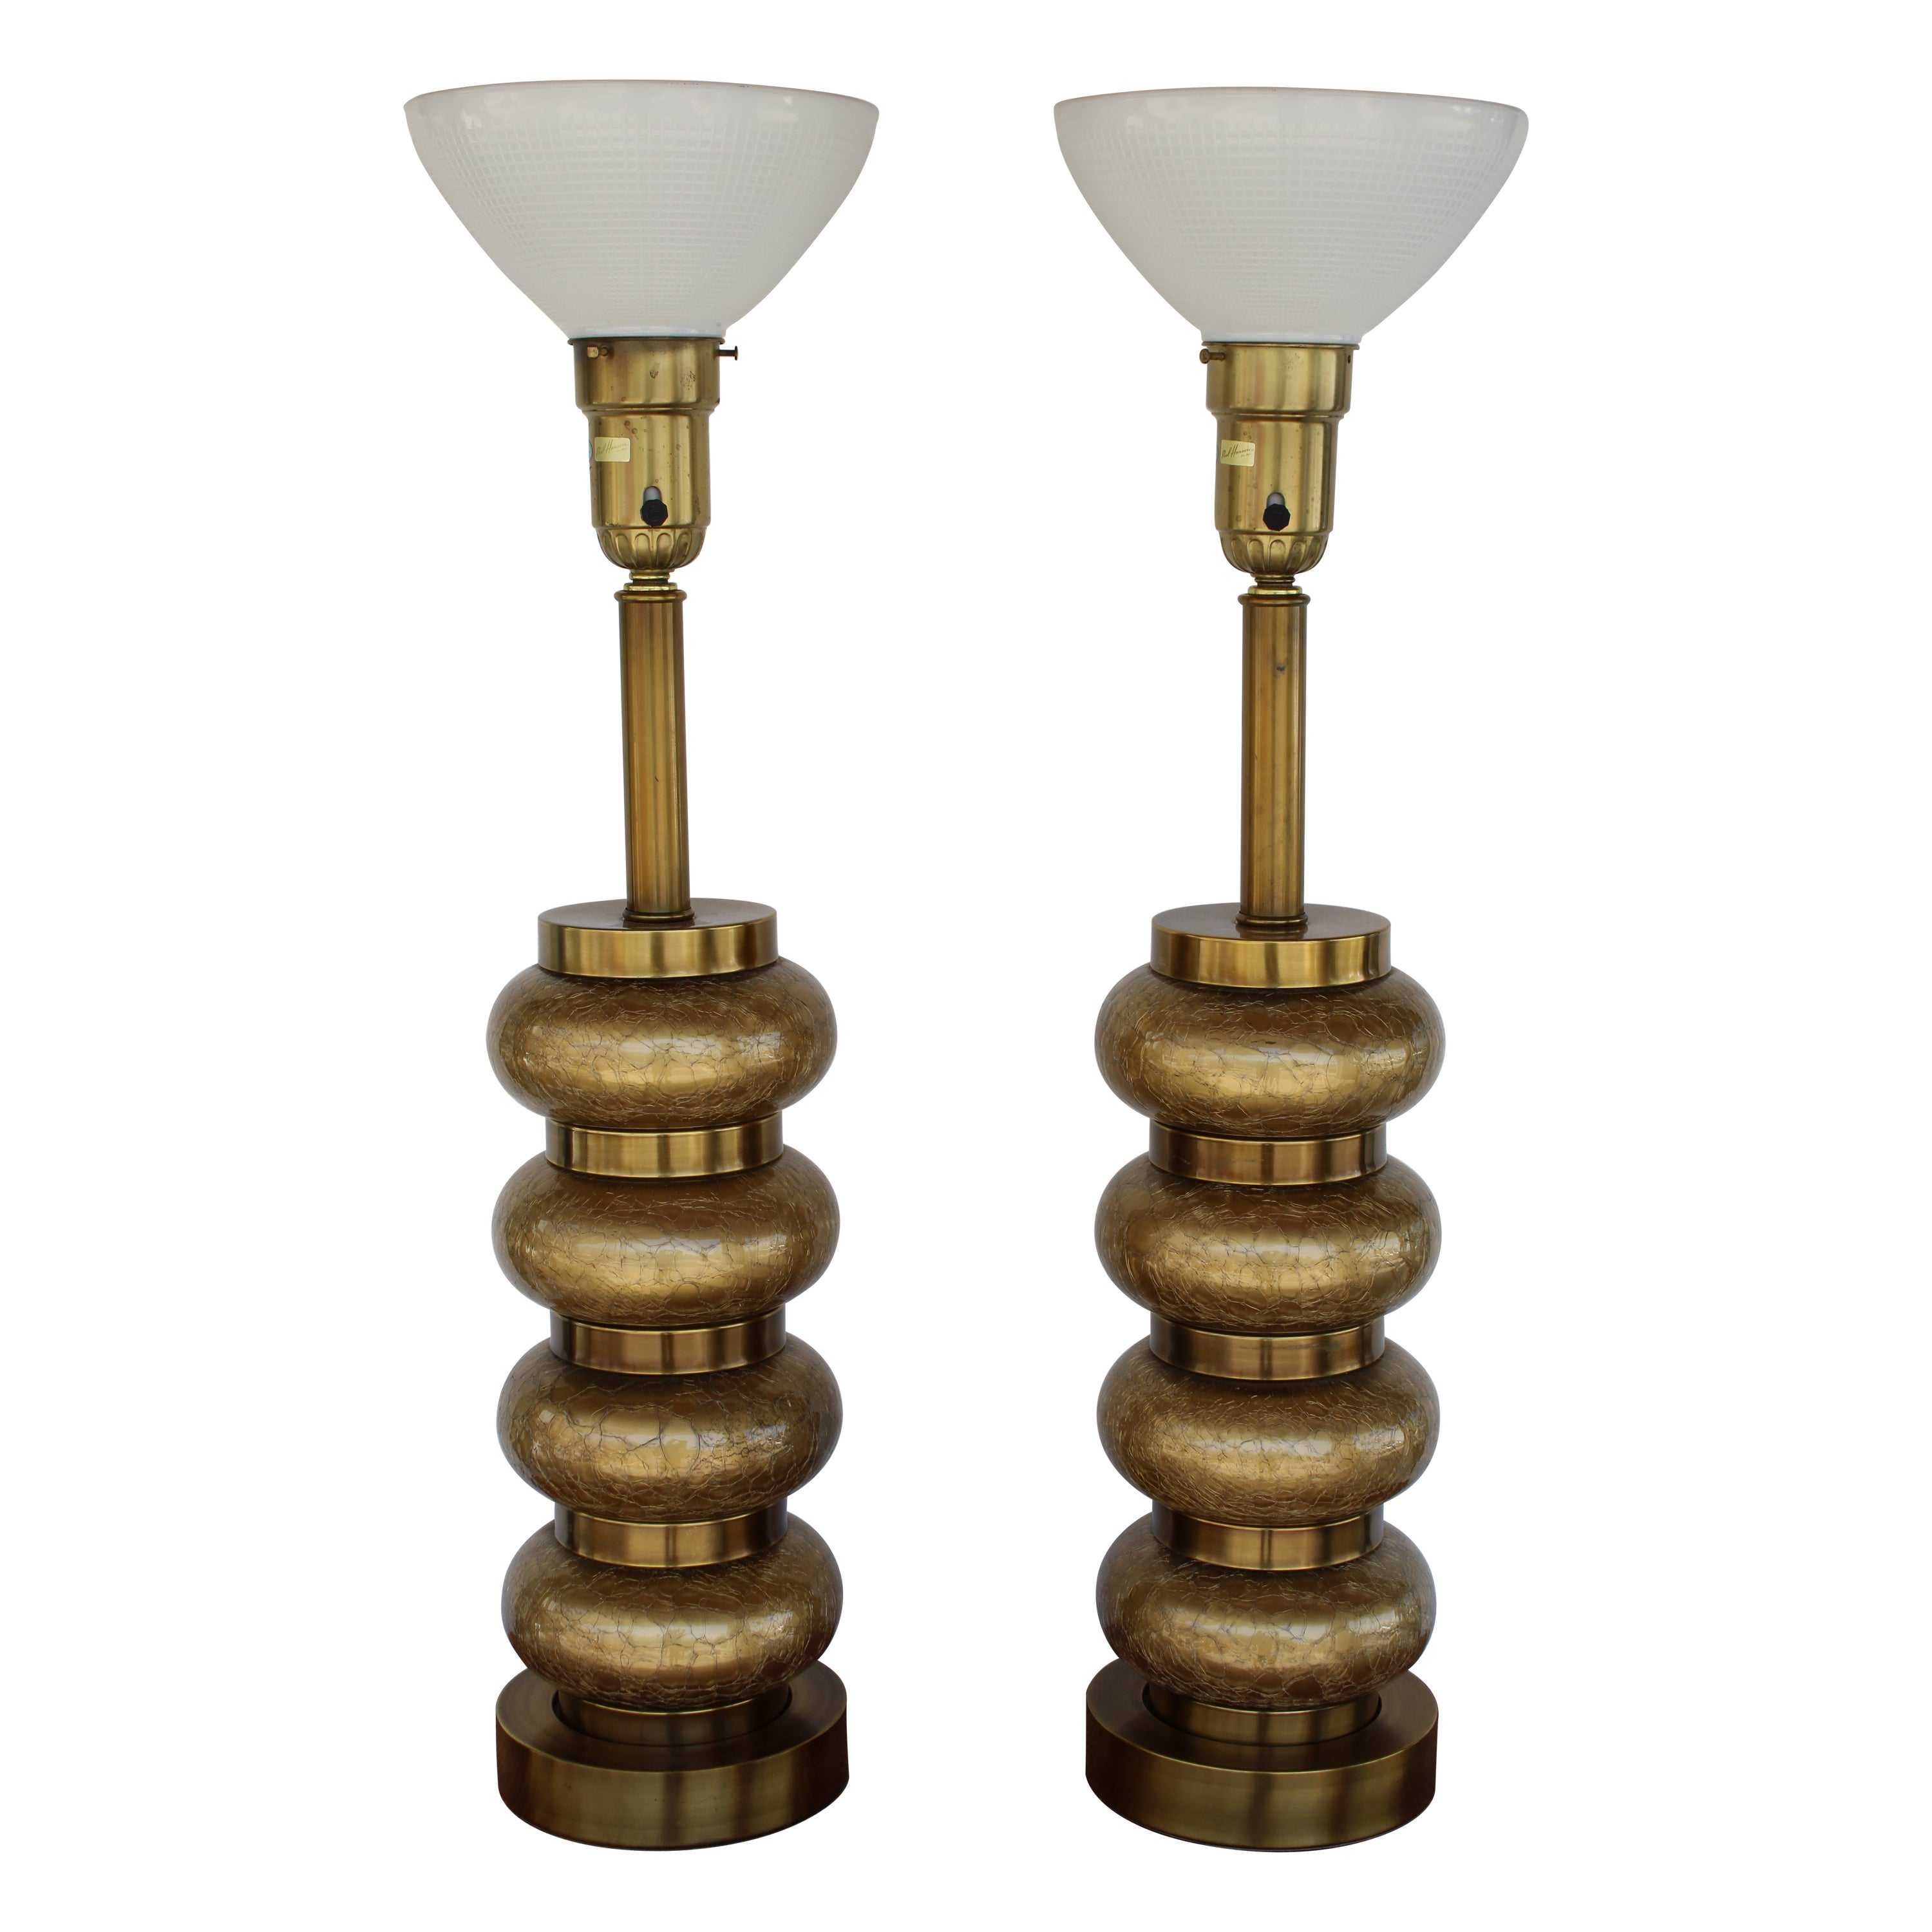 Pair of Paul Hanson Crackle Glass and Brass Table Lamps